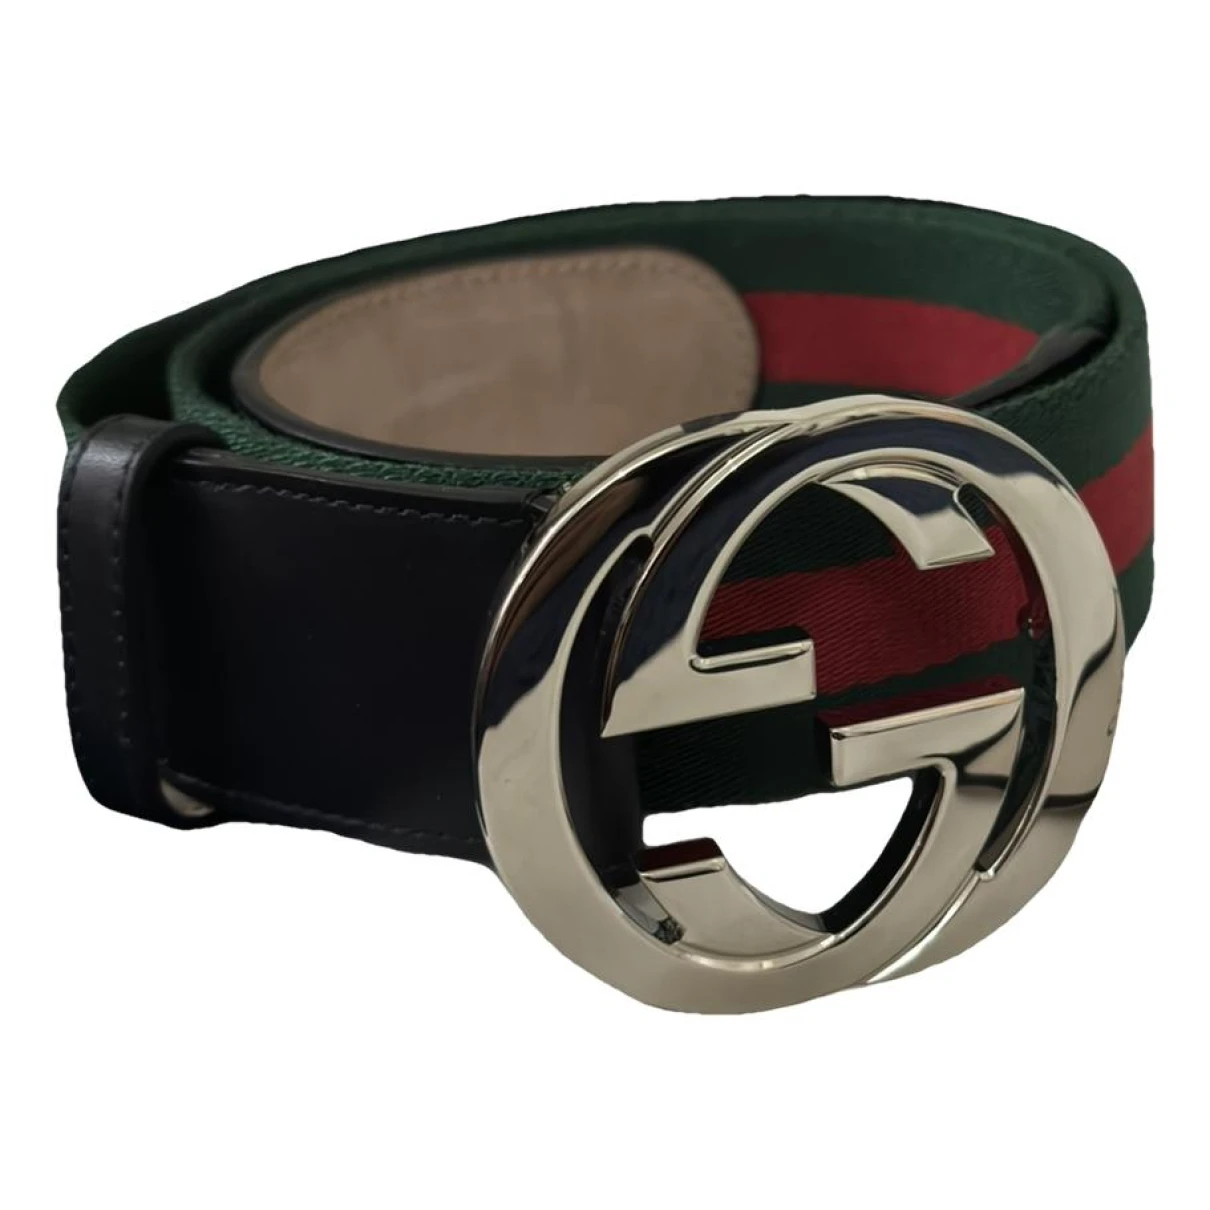 accessories Gucci belts Interlocking Buckle for Male Leather 80 cm. Used condition